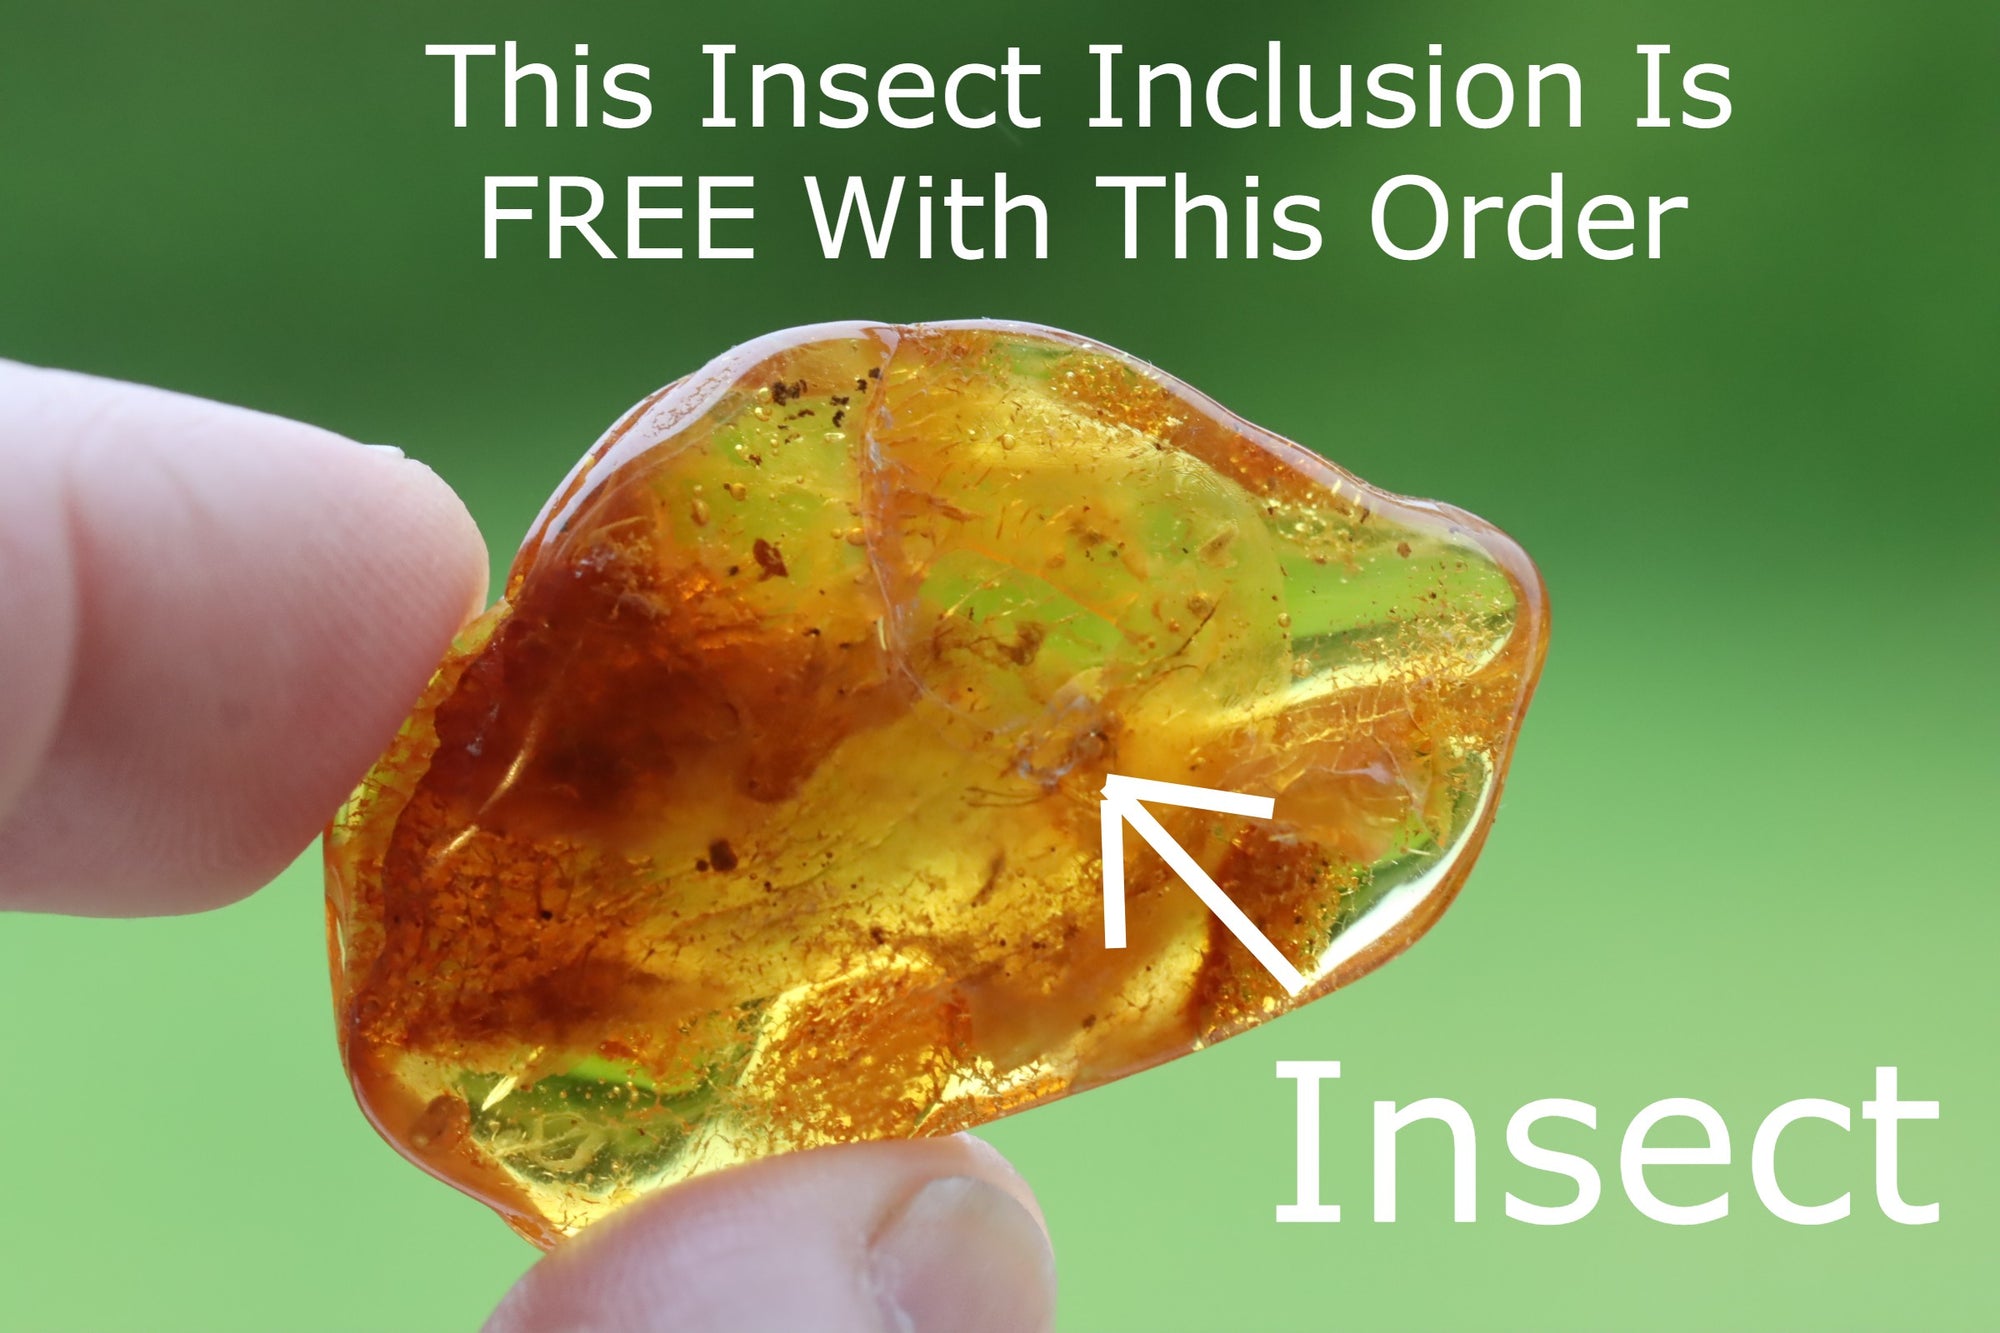 Unbelievable Large 79g Collector's Baltic Amber Gem